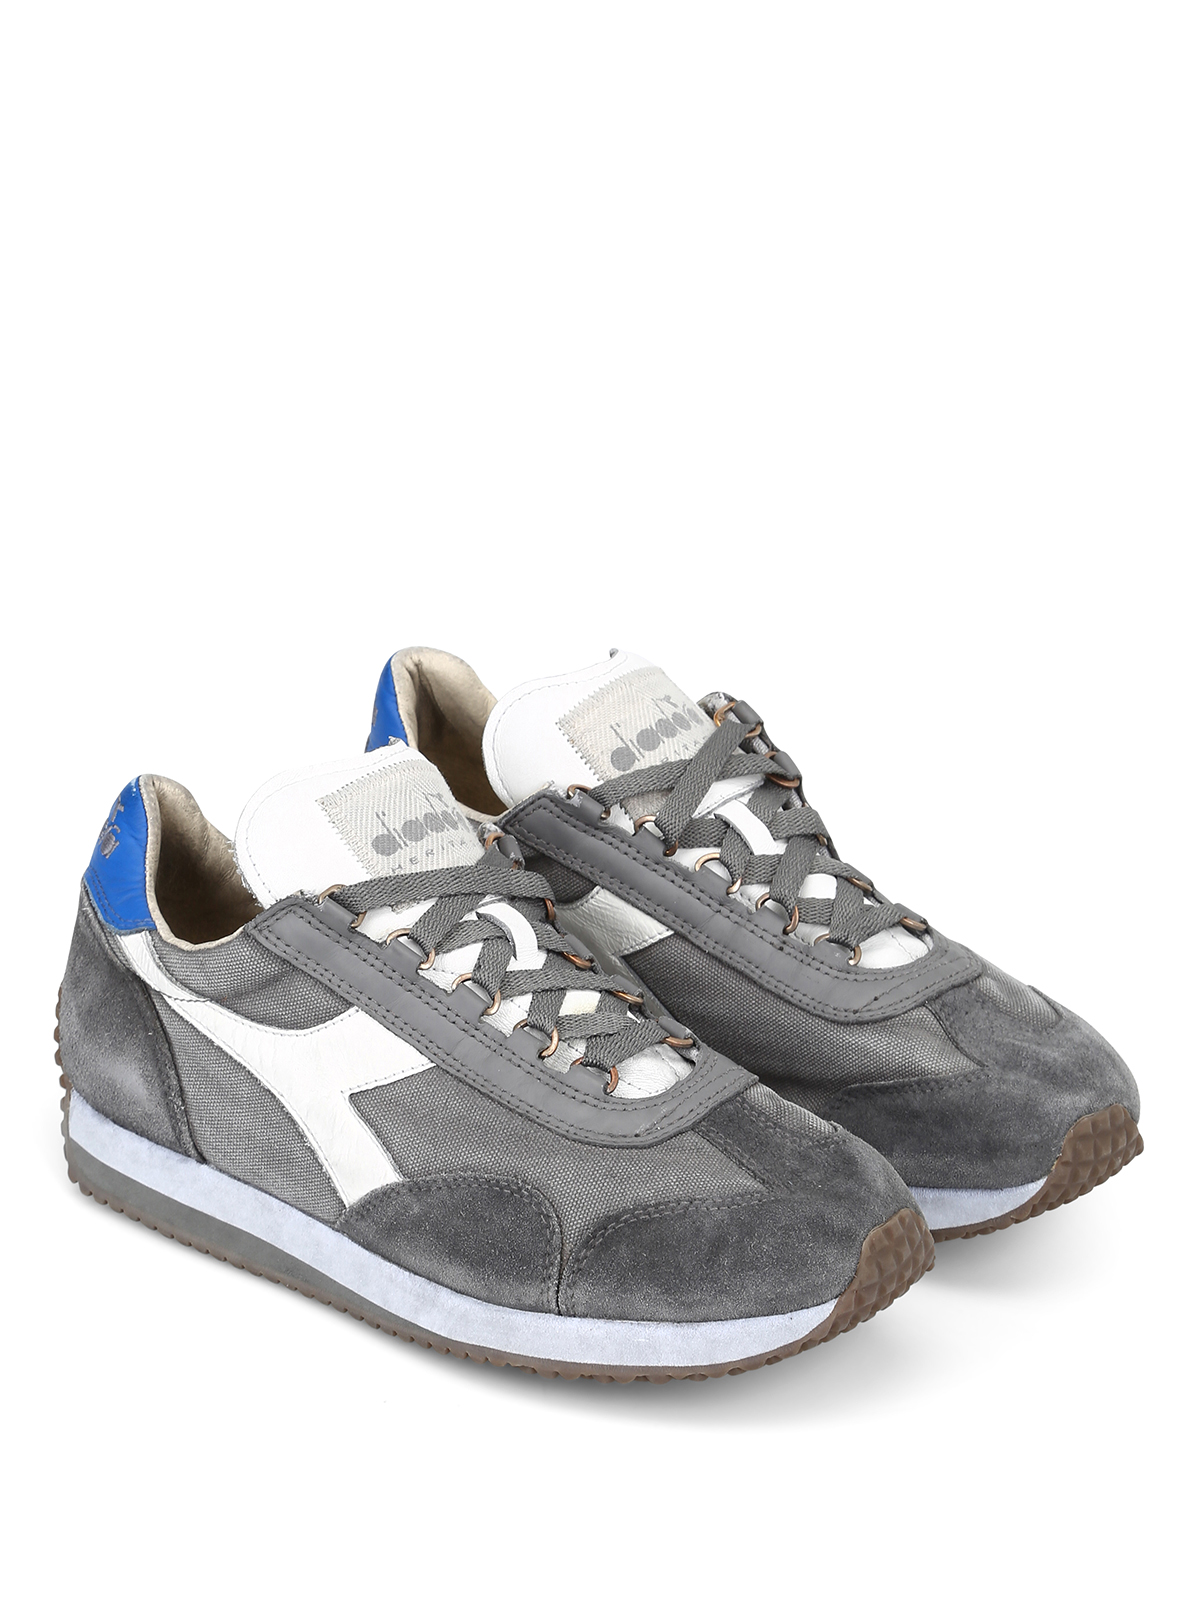 Diadora Heritage Grey Equipe Sw Dirty Evo Sneakers Trainers